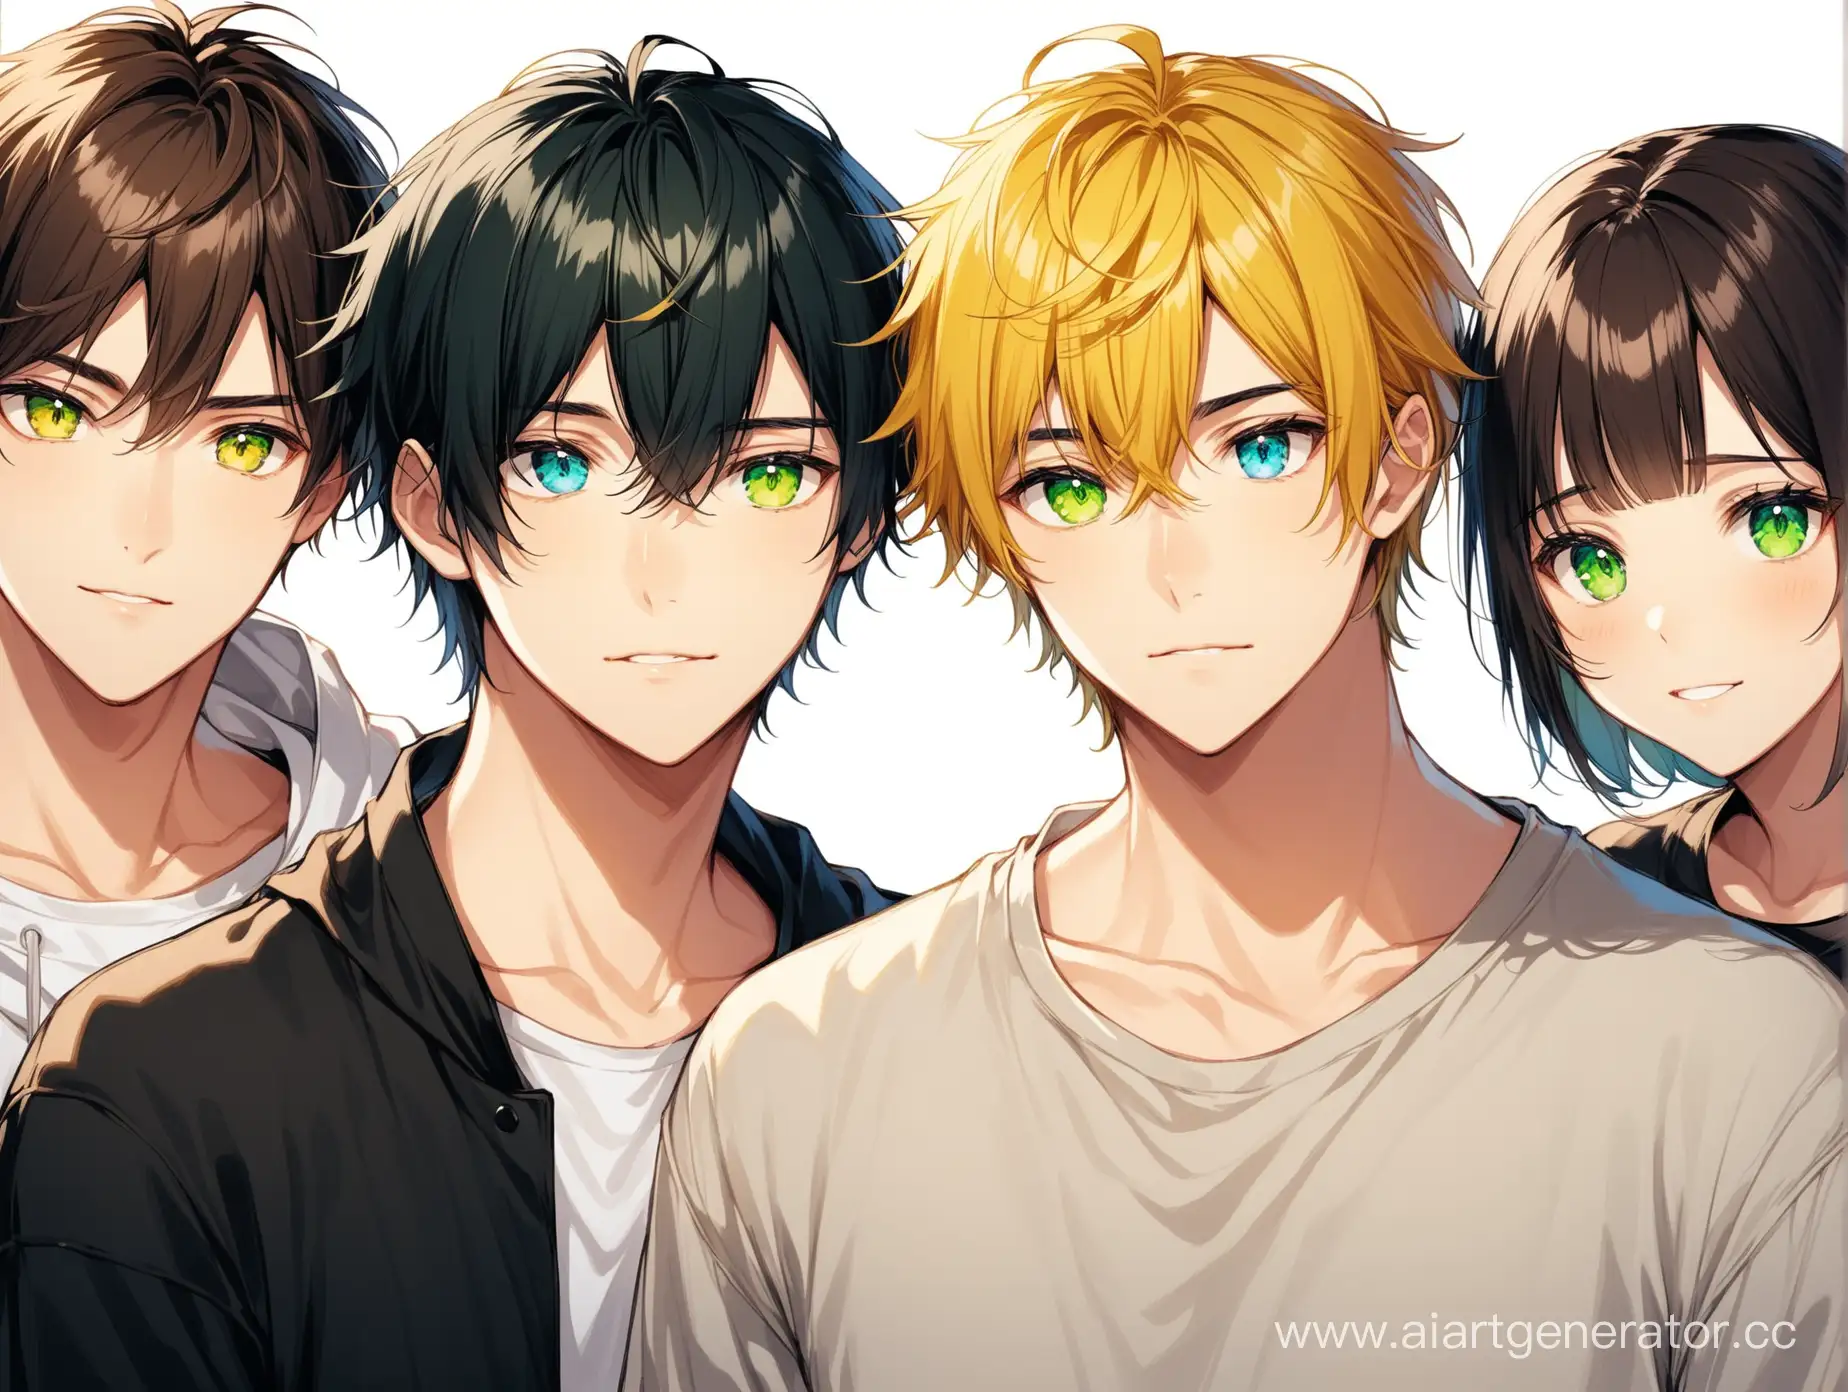 Portrait-of-Diverse-Young-Group-with-Distinctive-Eye-and-Hair-Colors